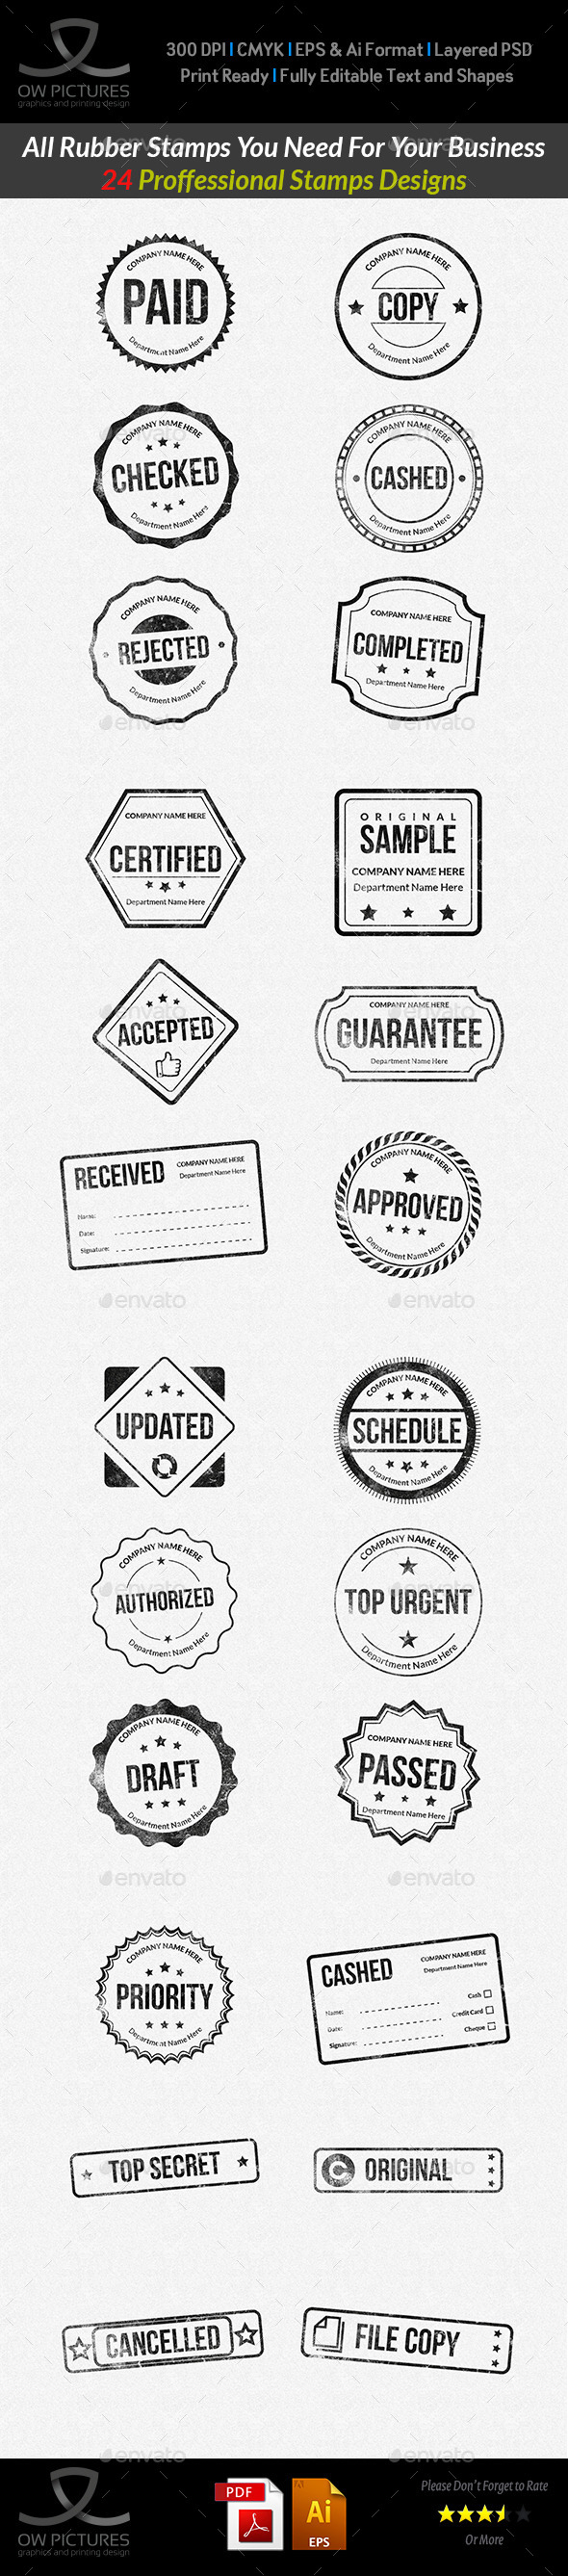 company rubber stamp template